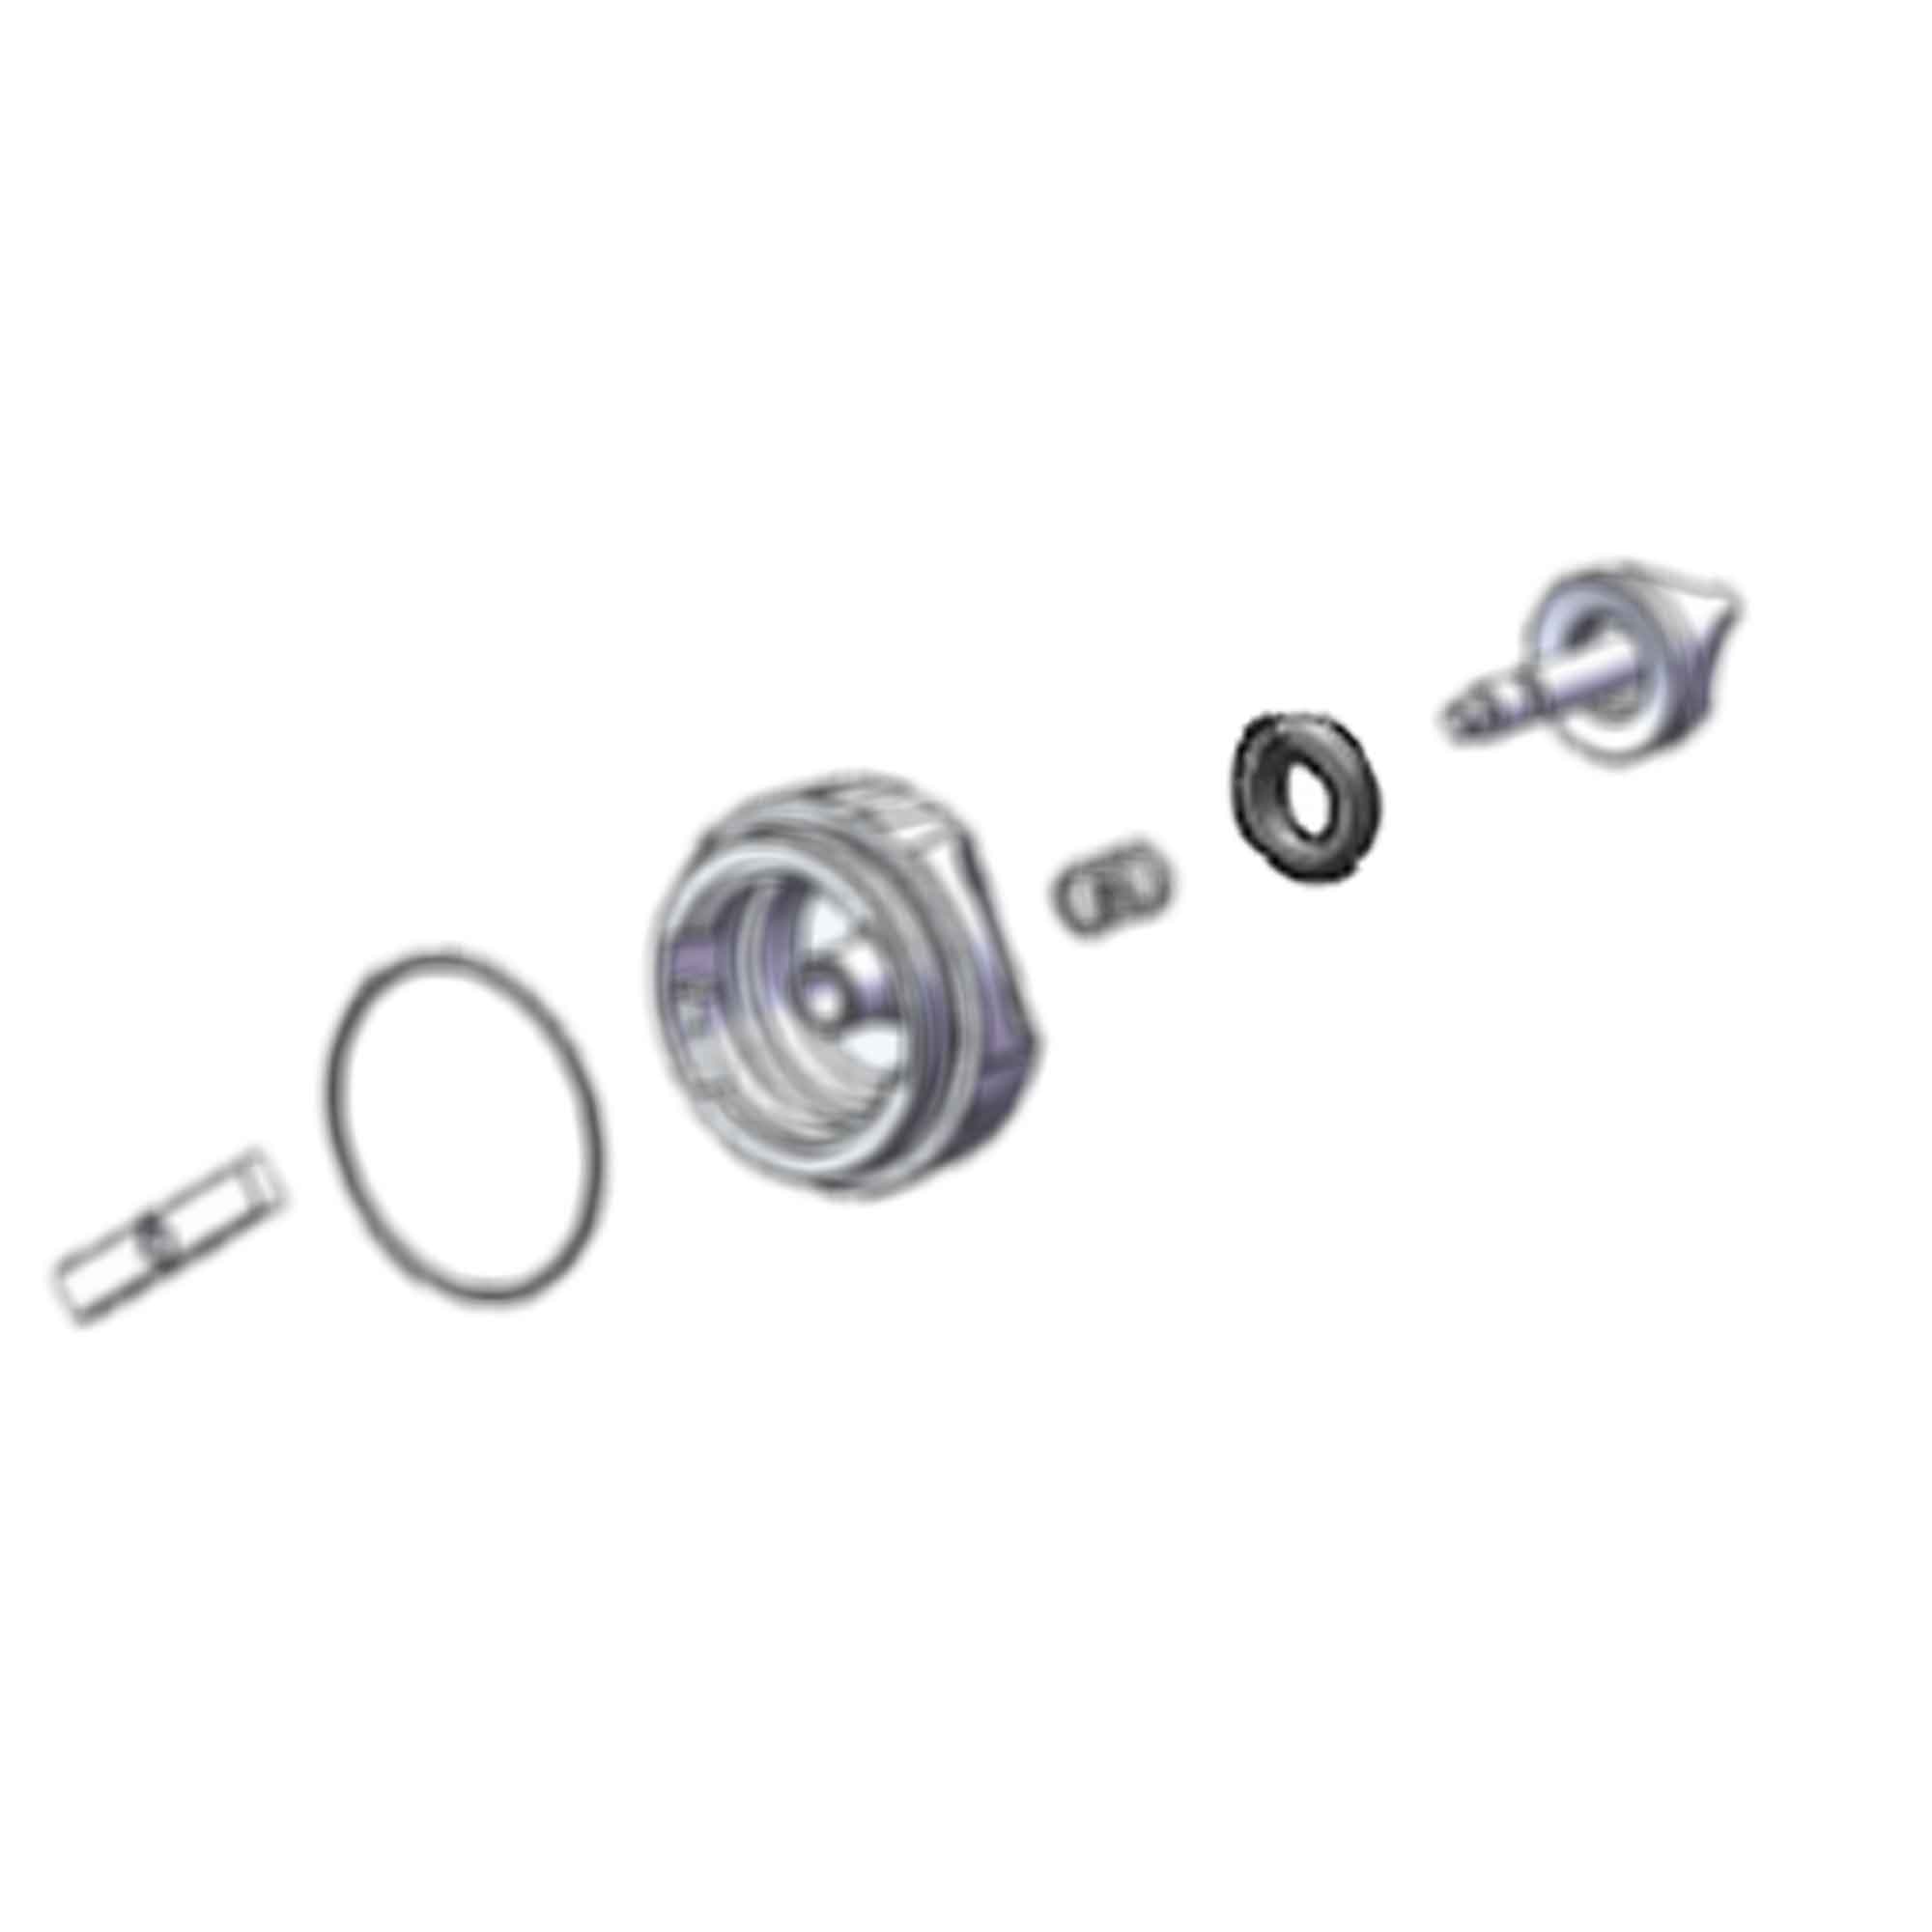 336413 - O-Ring Safety Stop (2-Pack) - PURspray